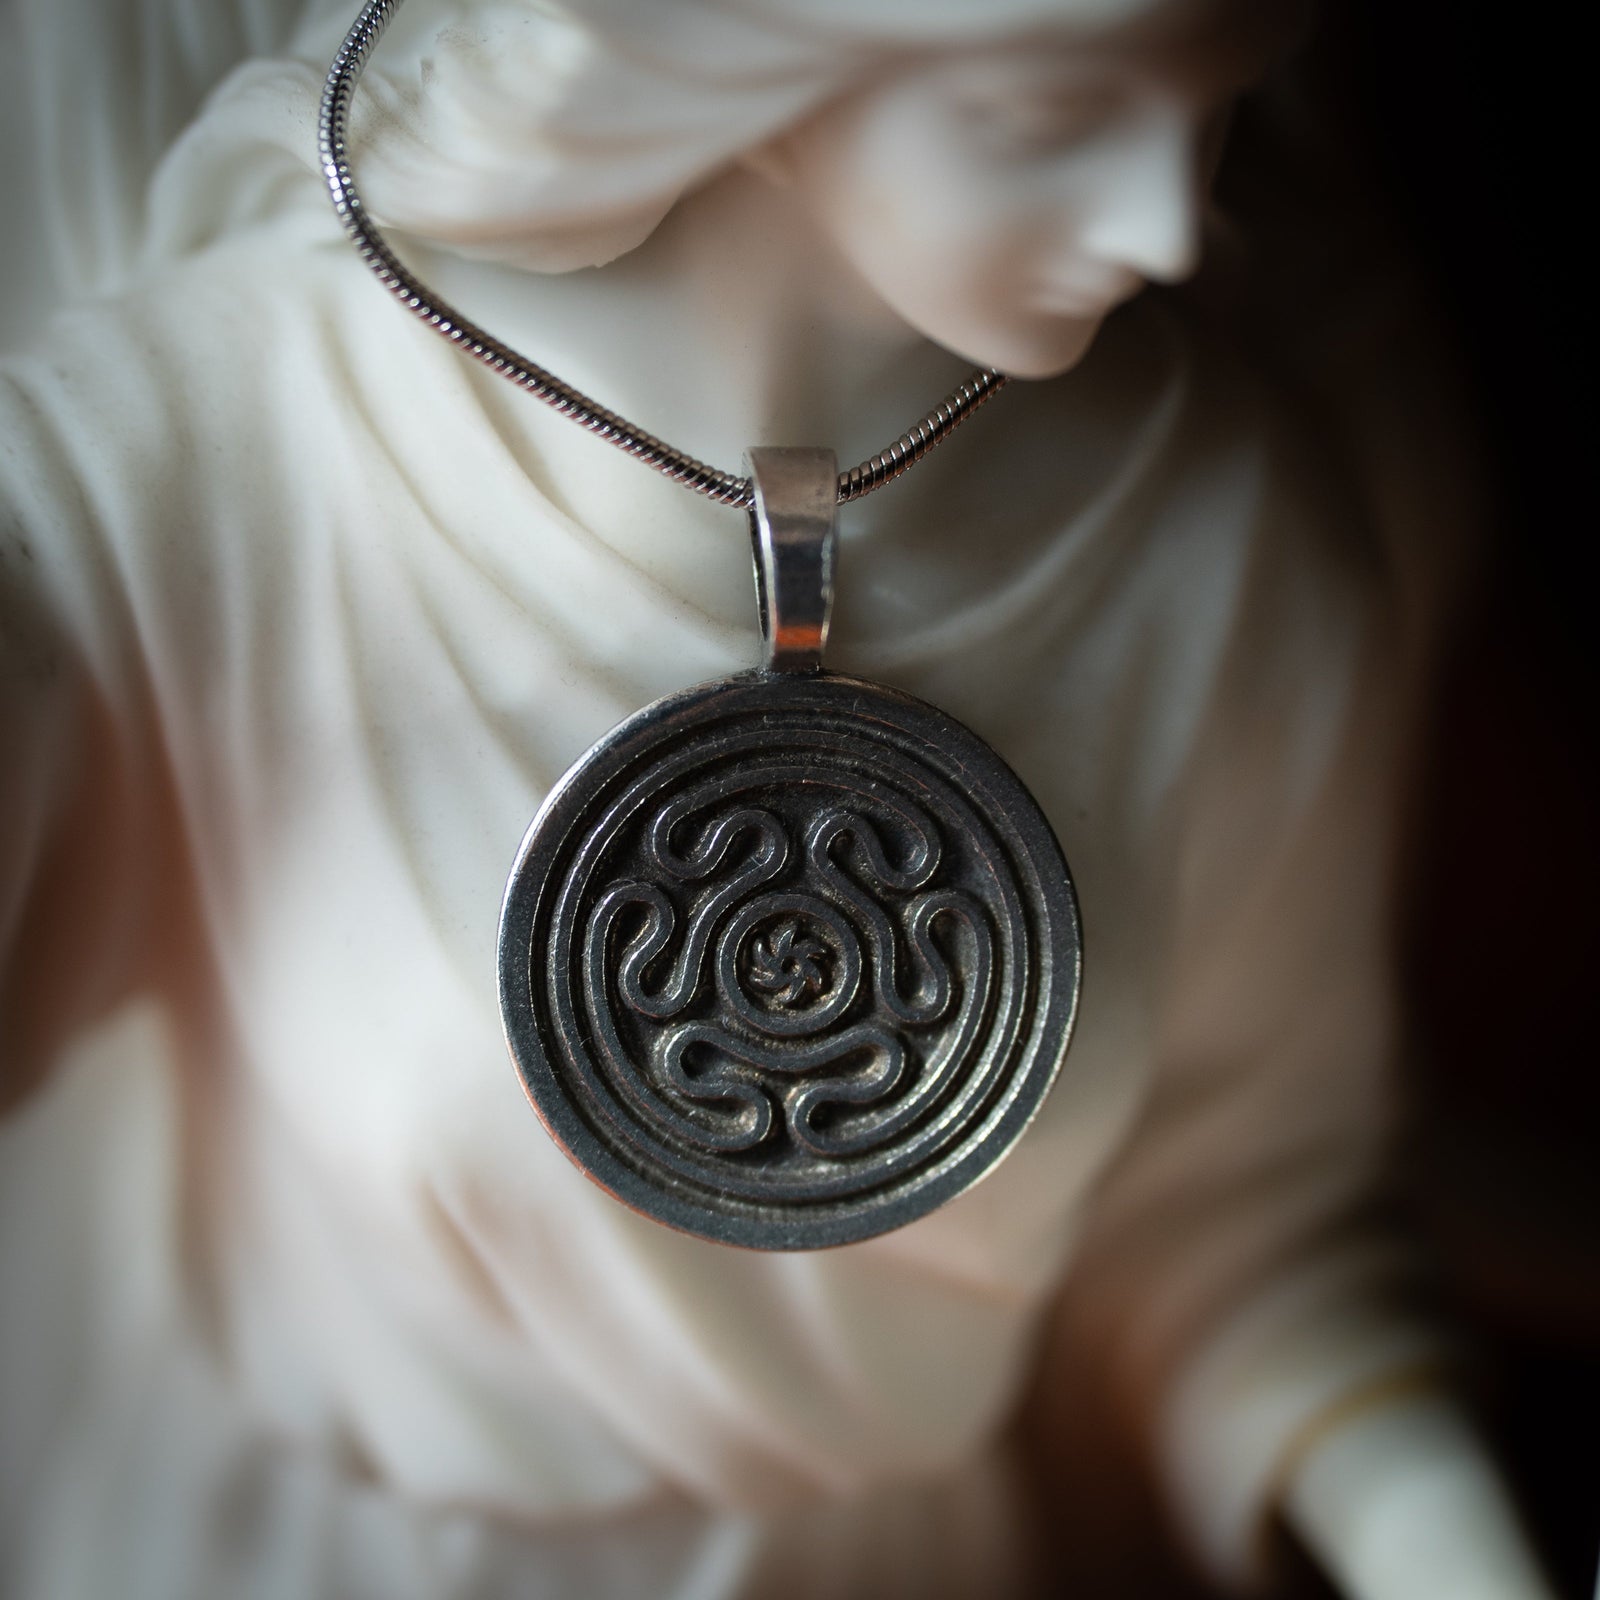 Hecate's Wheel Pendant w/ Chain